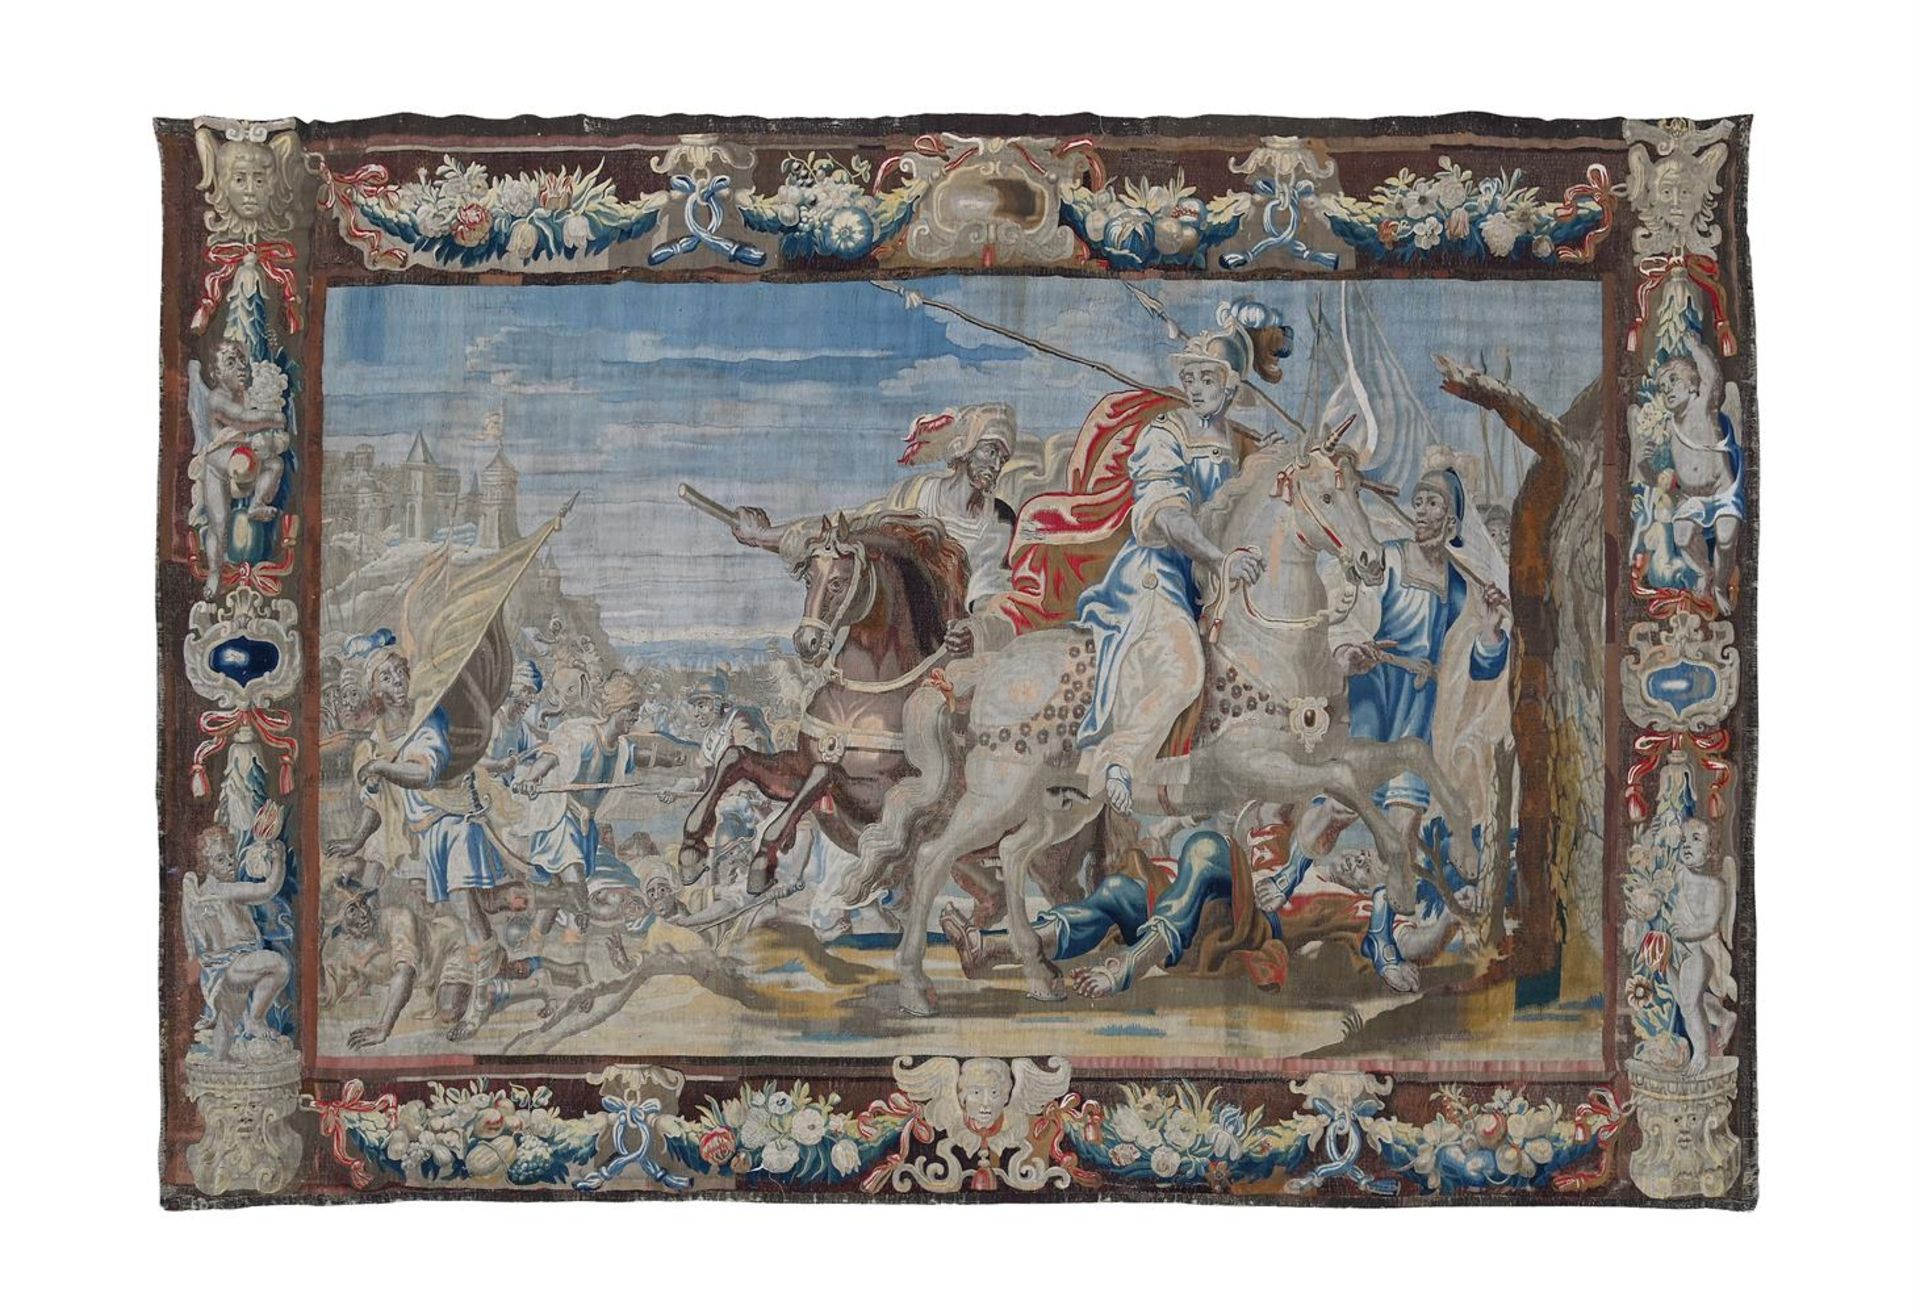 A BRUSSELS HISTORICAL TAPESTRY FROM THE LIFE OF ALEXANDER THE GREAT, LATE 17TH CENTURY